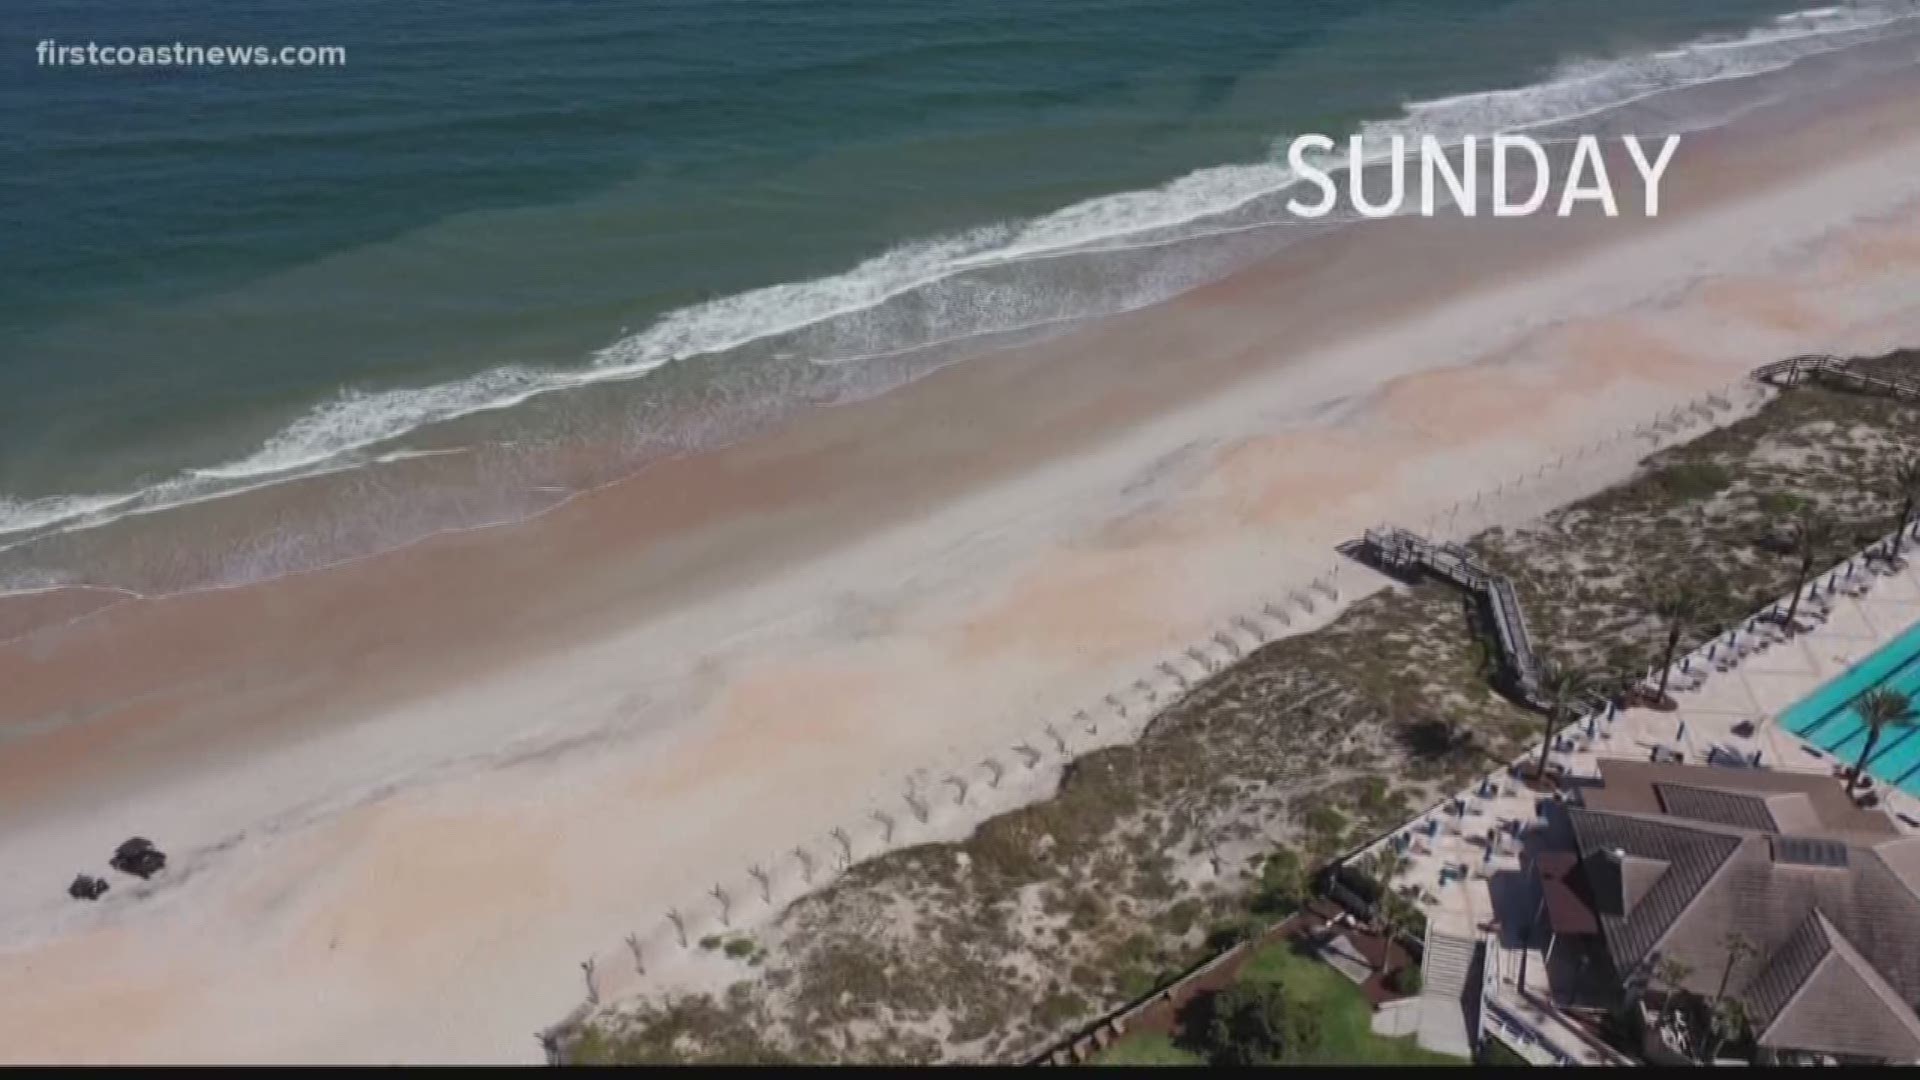 In its first full day of beach closures since the coronavirus crisis began, St. Johns County residents and officials weigh the pros and cons.